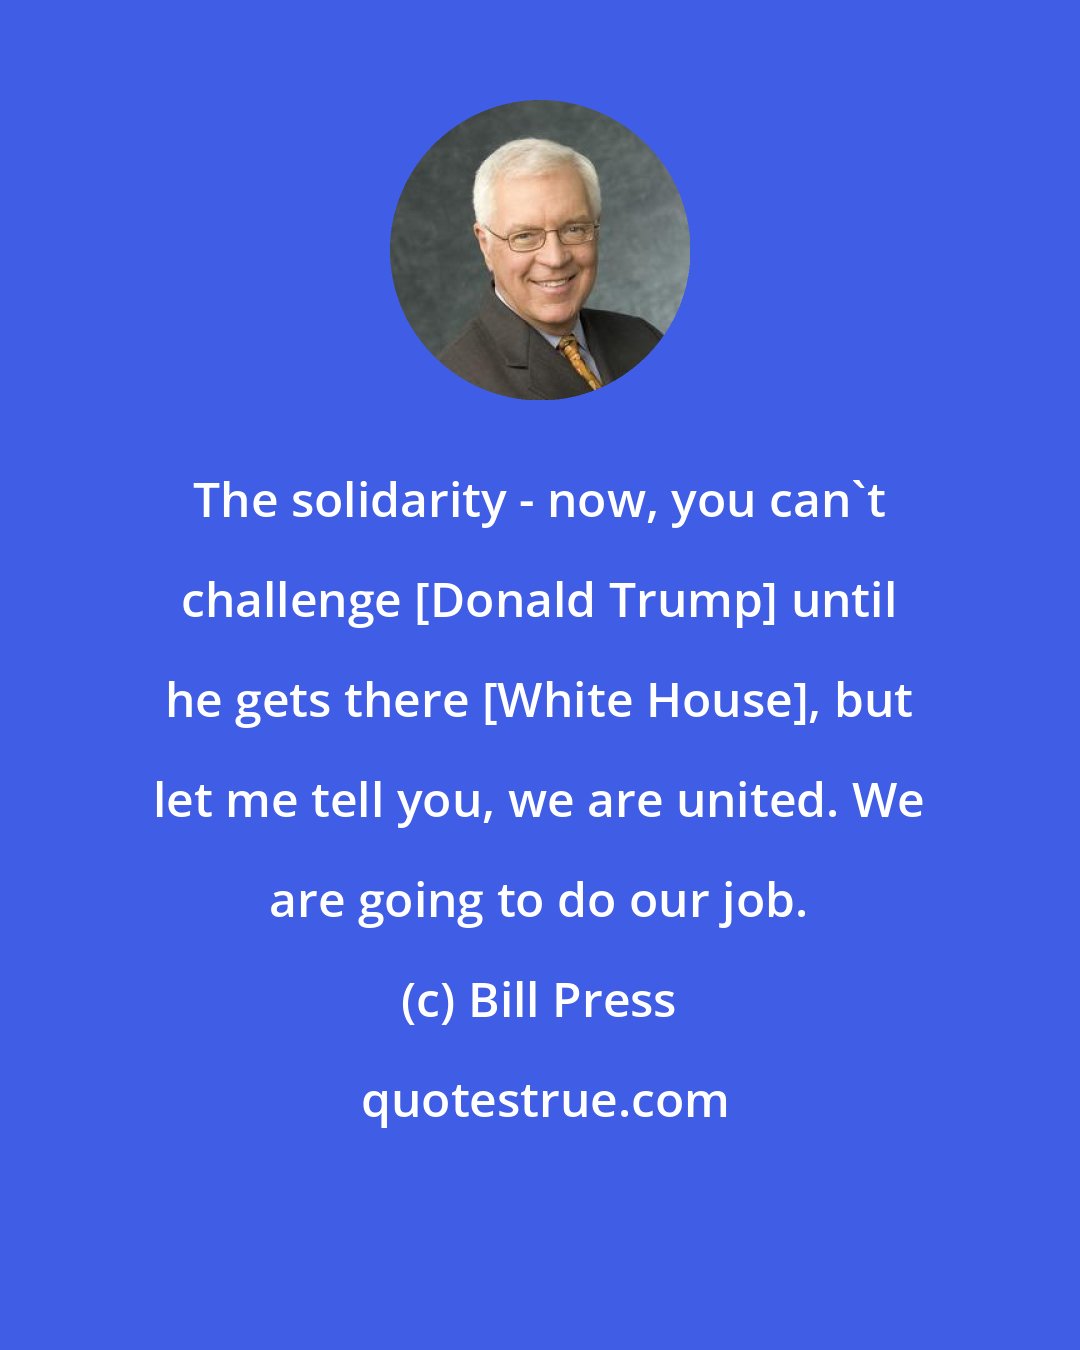 Bill Press: The solidarity - now, you can`t challenge [Donald Trump] until he gets there [White House], but let me tell you, we are united. We are going to do our job.